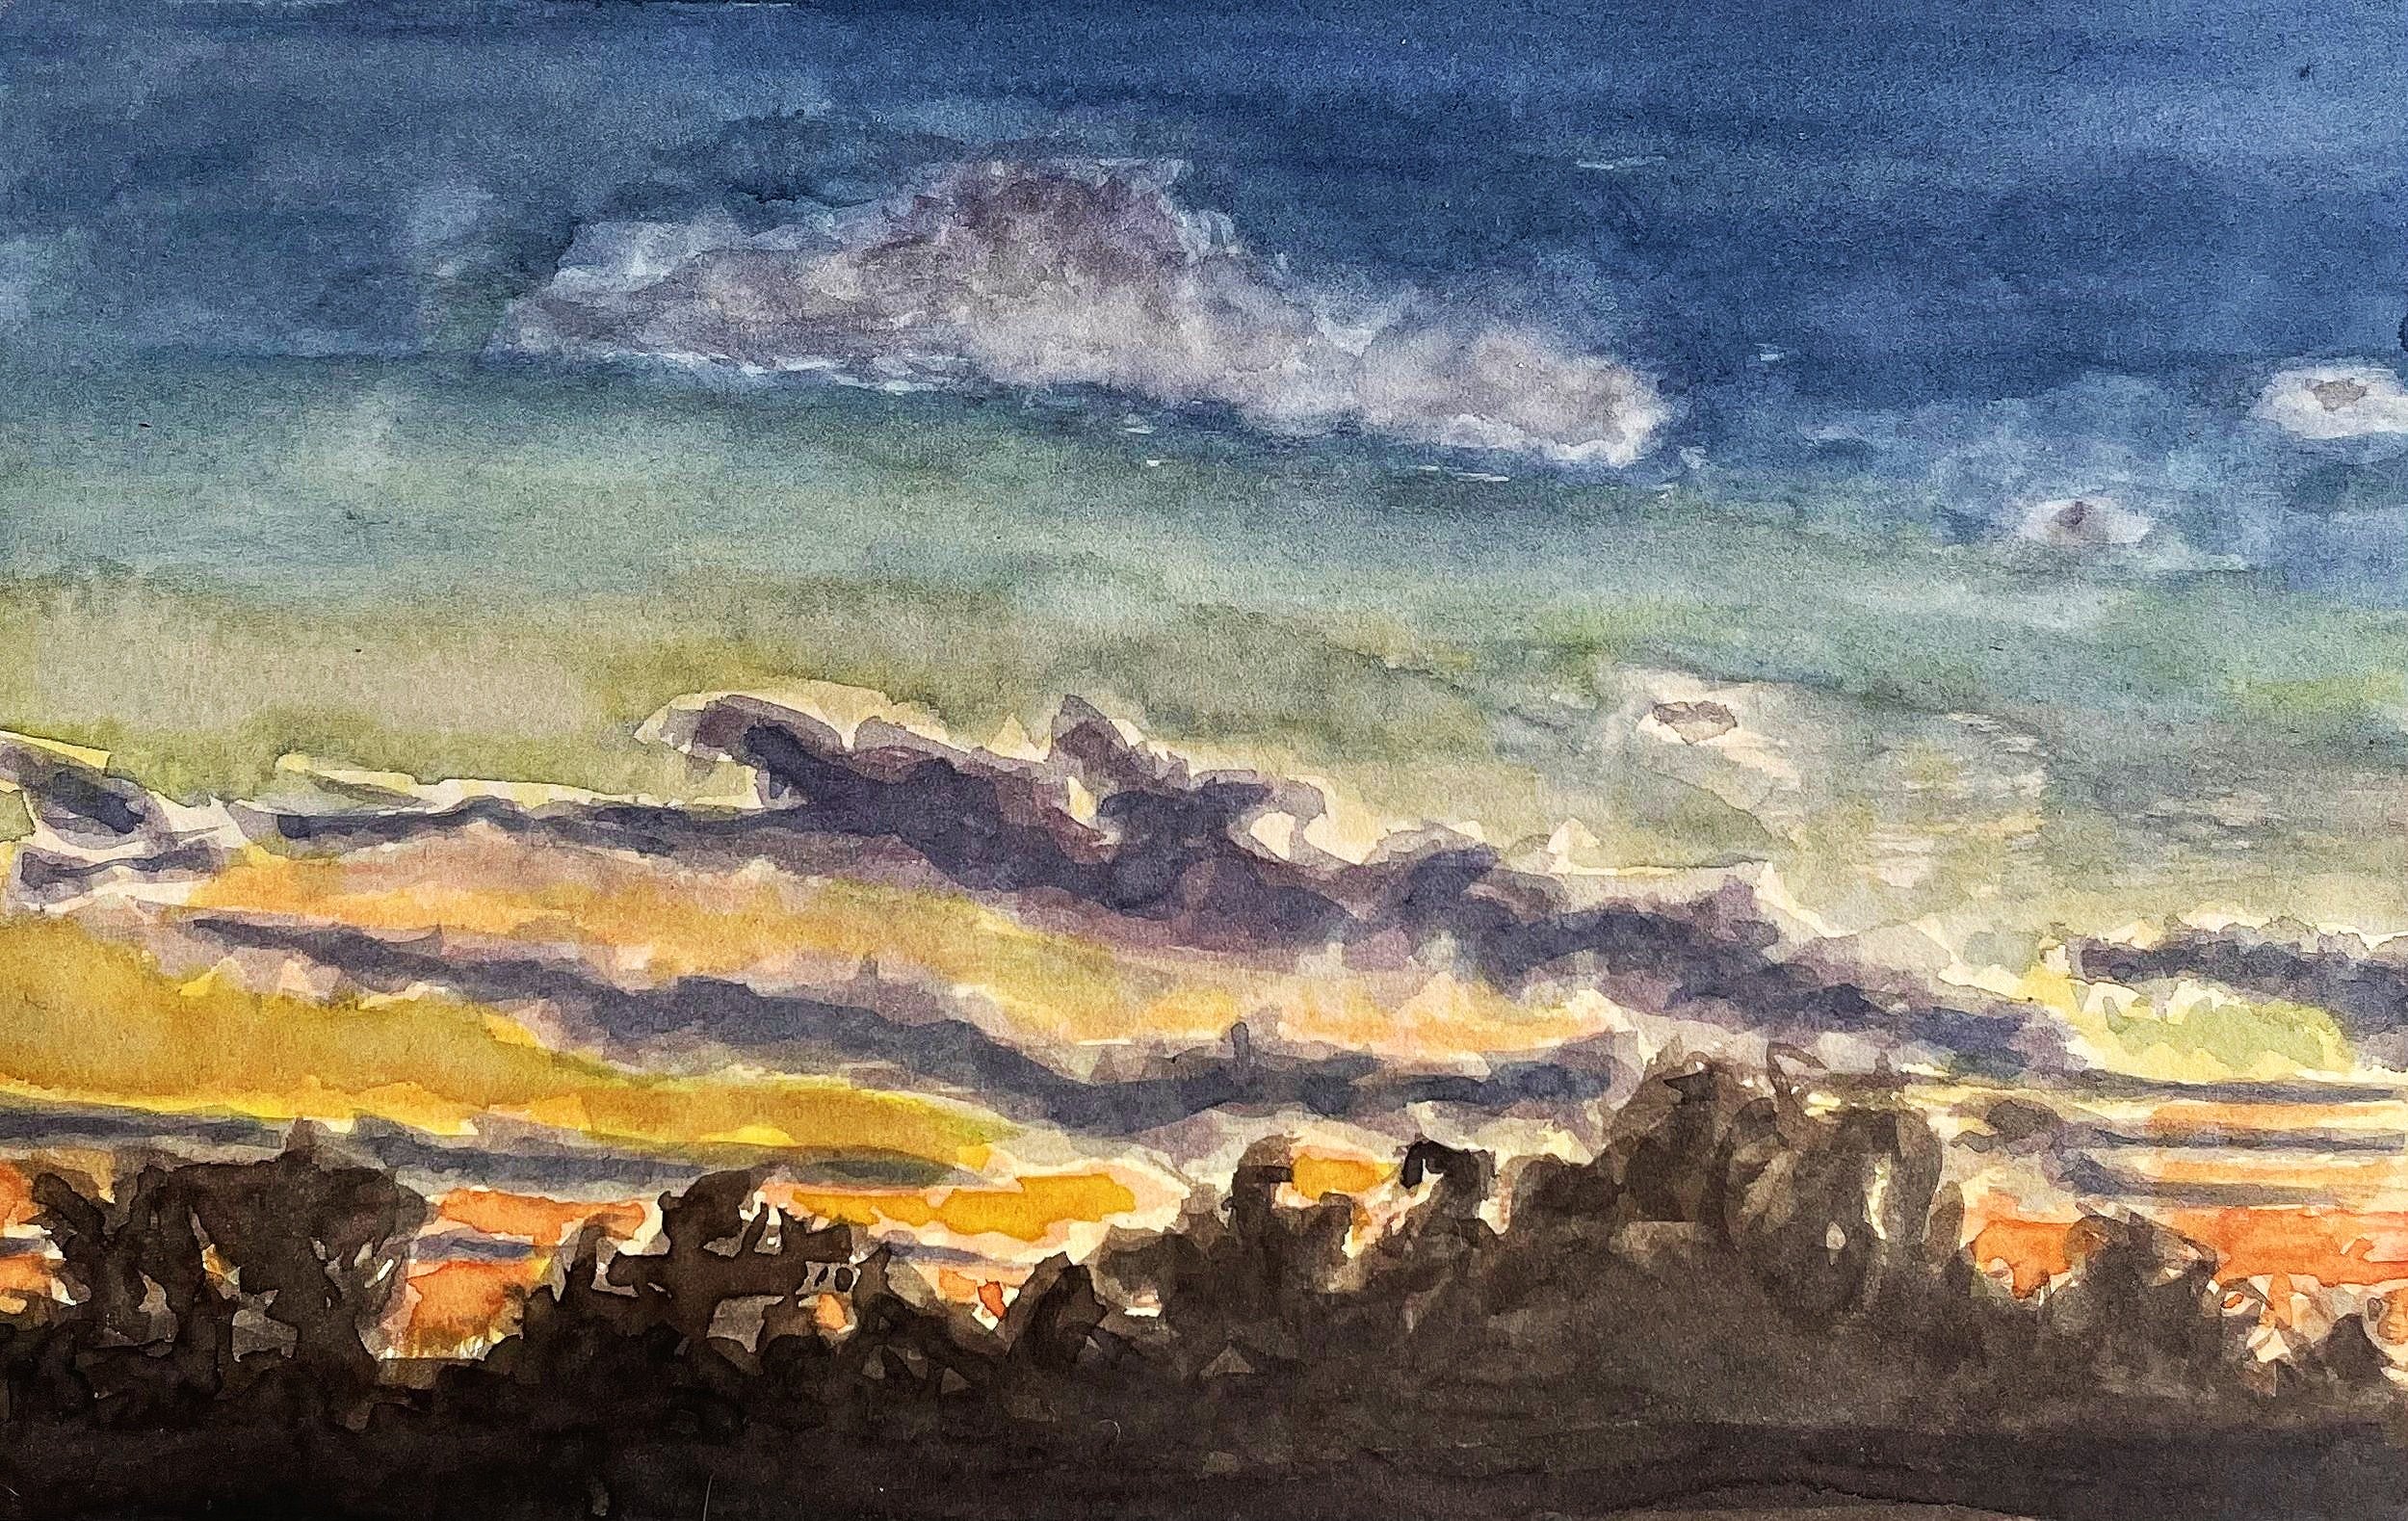   Late Sunset at Lisa’s,  Watercolor on Hotpress, 9” x 12”, 2022 